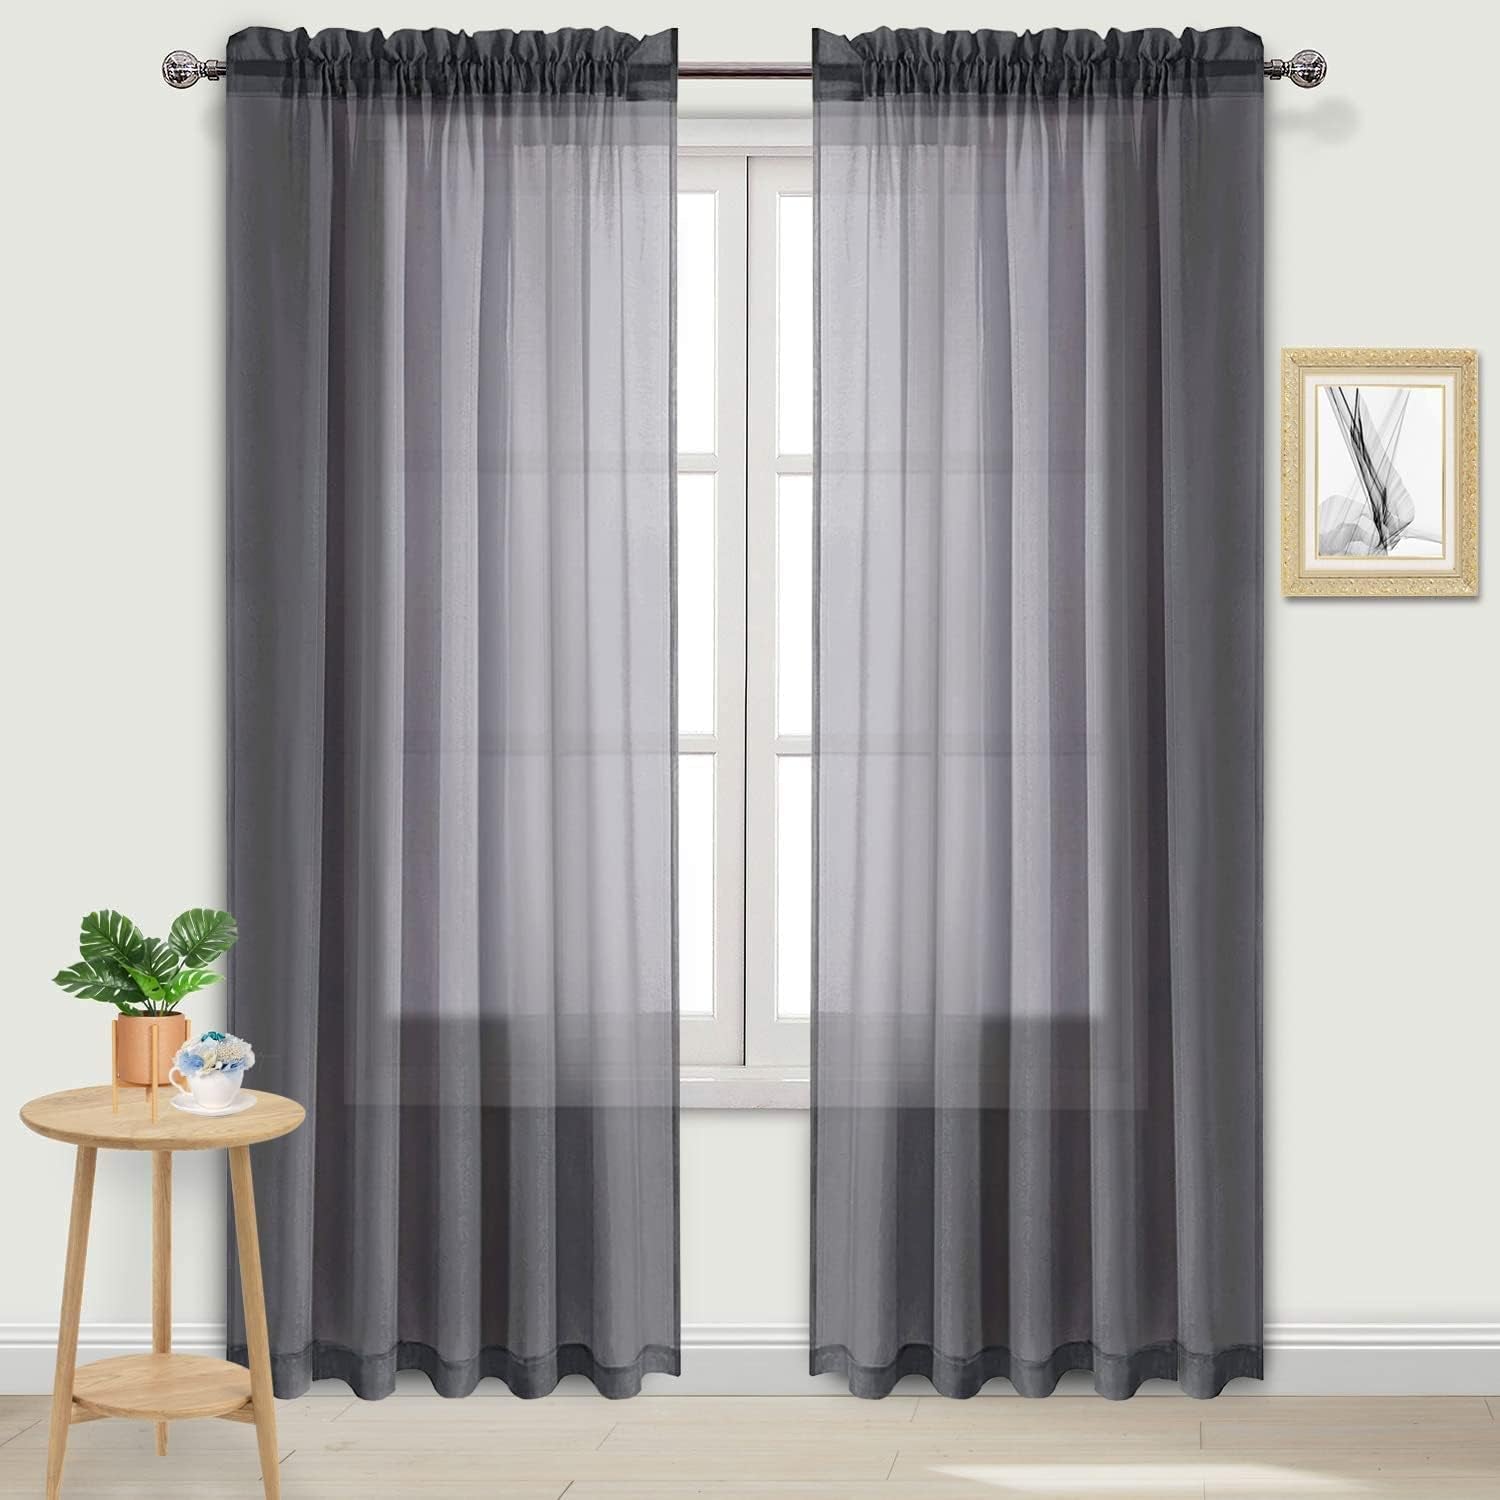 SLIFEOW Pinch Pleated Sheer Curtains, Jacquard Rod Pocket Drape Smooth Living Room Bedroom Curtains, 63 Inch Length 2 Panels Dark Grey W52Xl63  SLIFEOW   